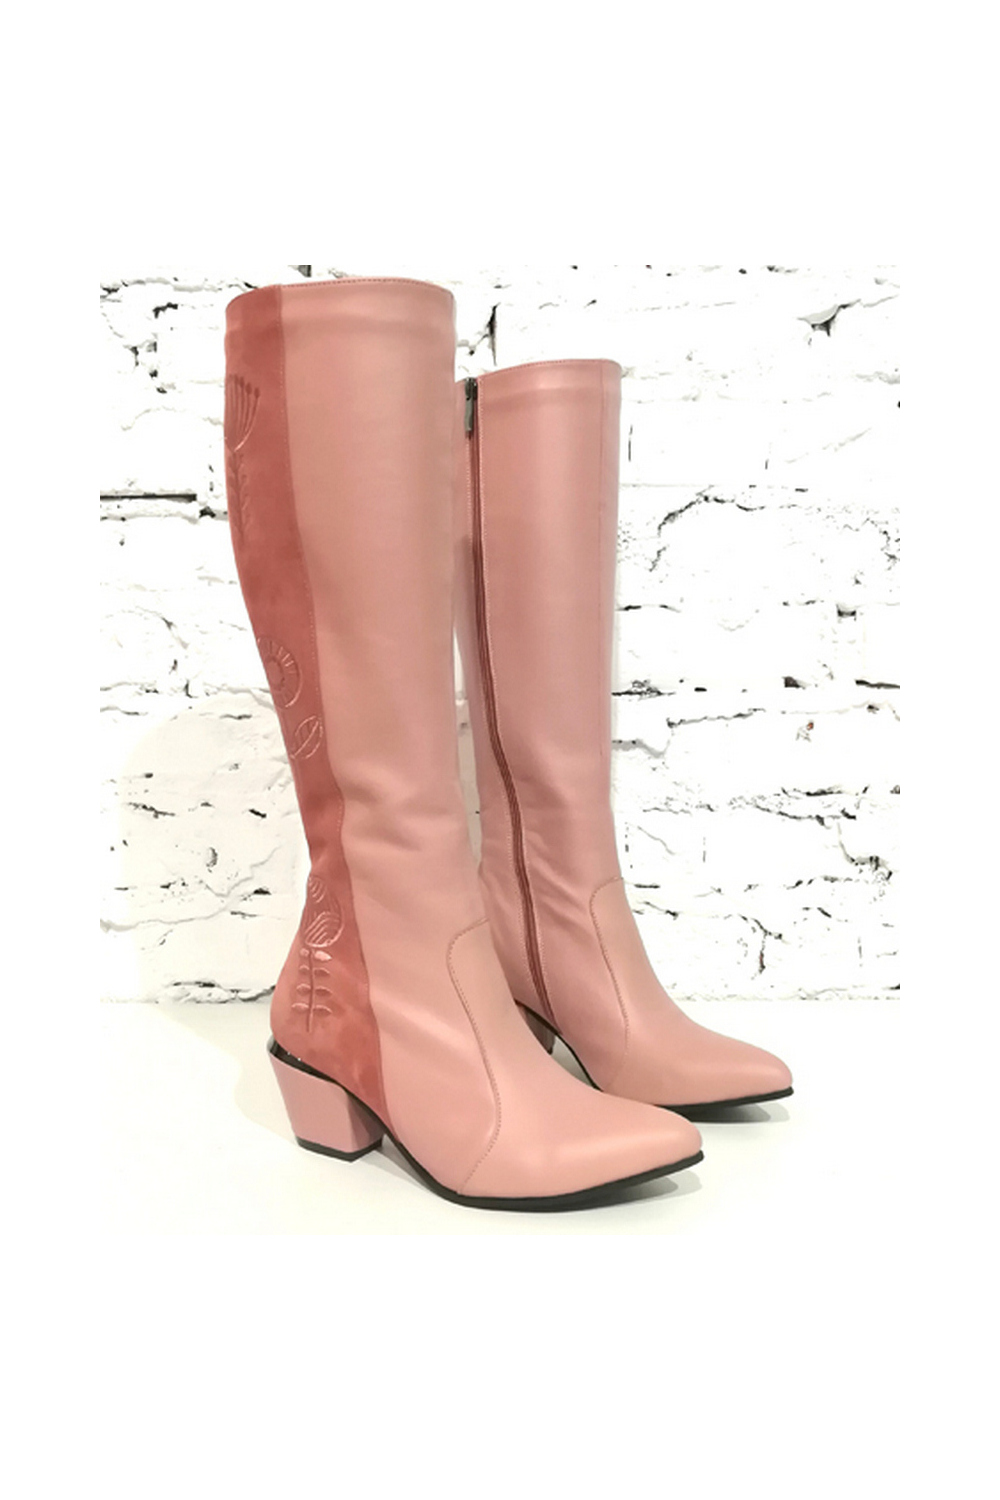 Buy Women's Pink High Leather Zipper Boots with Embroidered Sock Mid Heel, Comfotrable design shoes 